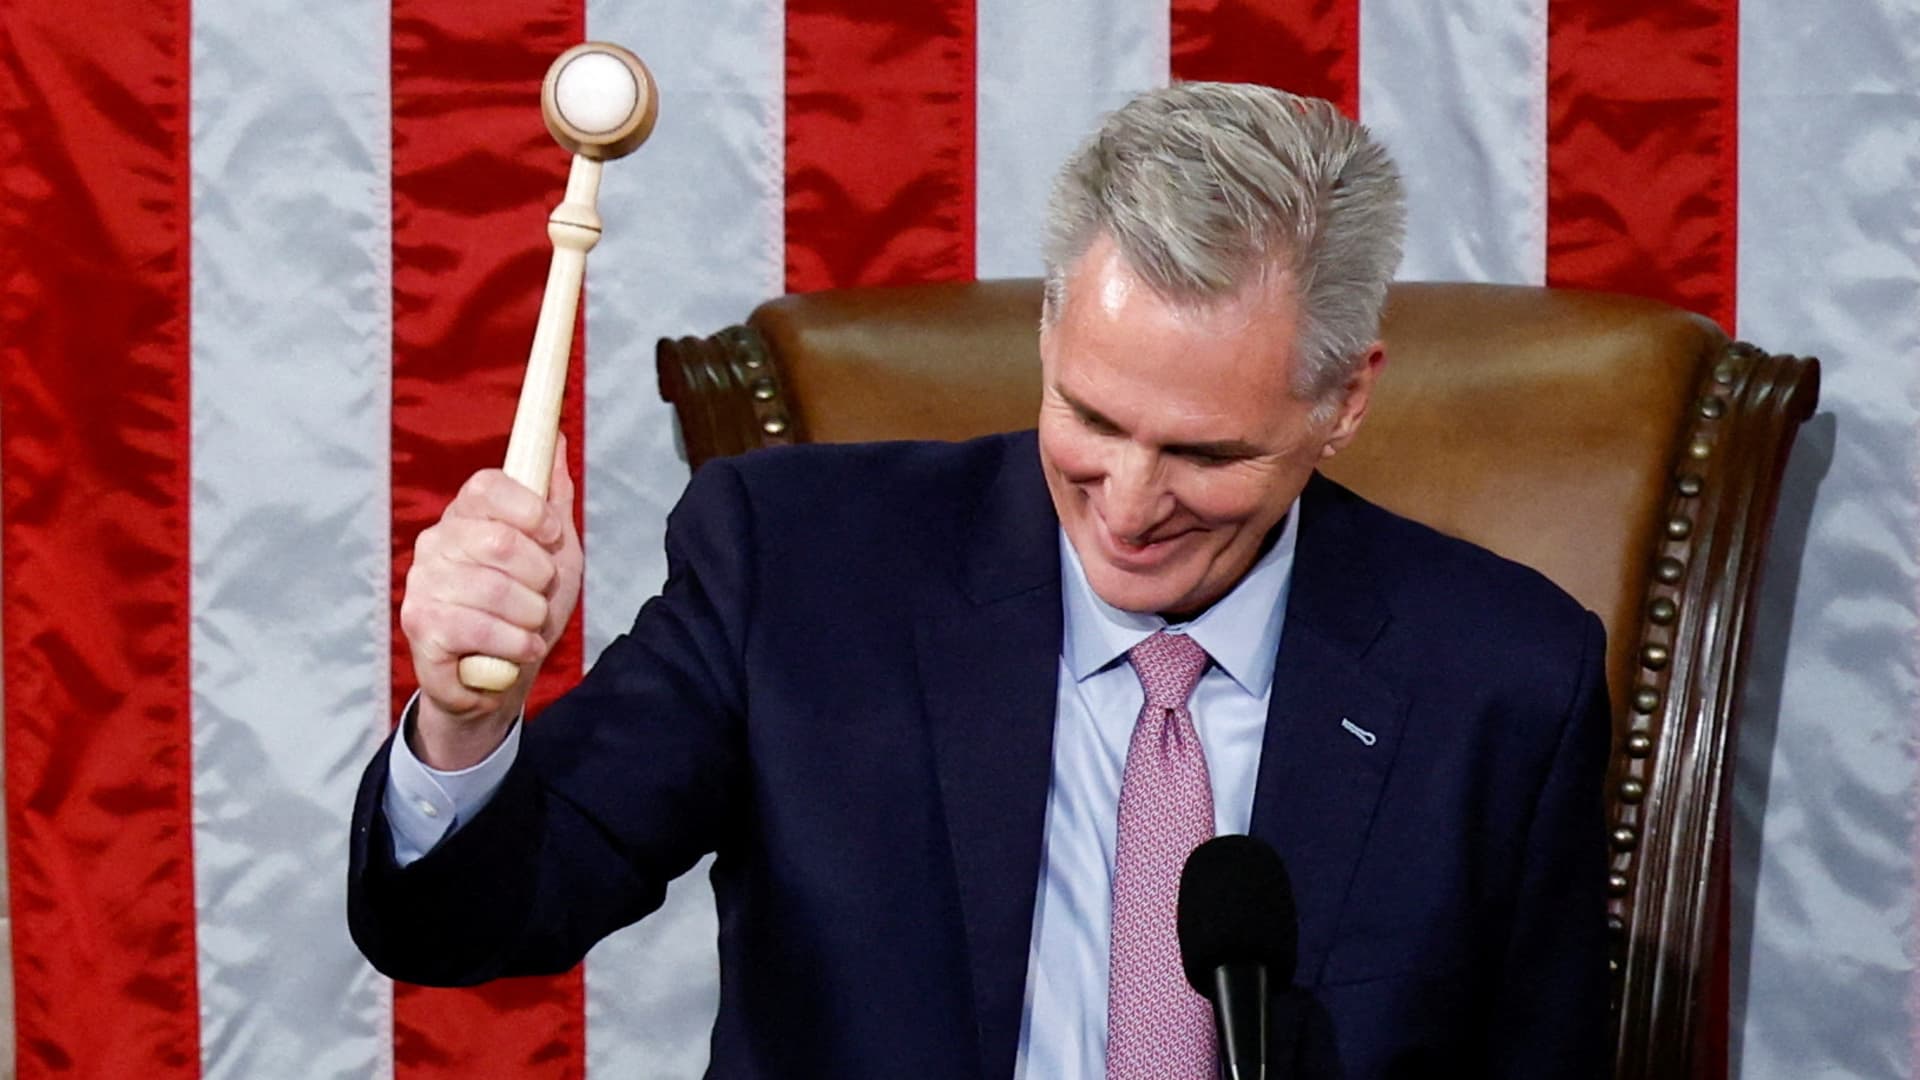 Speaker of the House Kevin McCarthy (R-CA) bangs the Speaker's gavel for the first time after being elected the next Speaker of the U.S. House of Representatives in a late night 15th round of voting on the fourth day of the 118th Congress at the U.S. Capitol in Washington, U.S., January 7, 2023. 